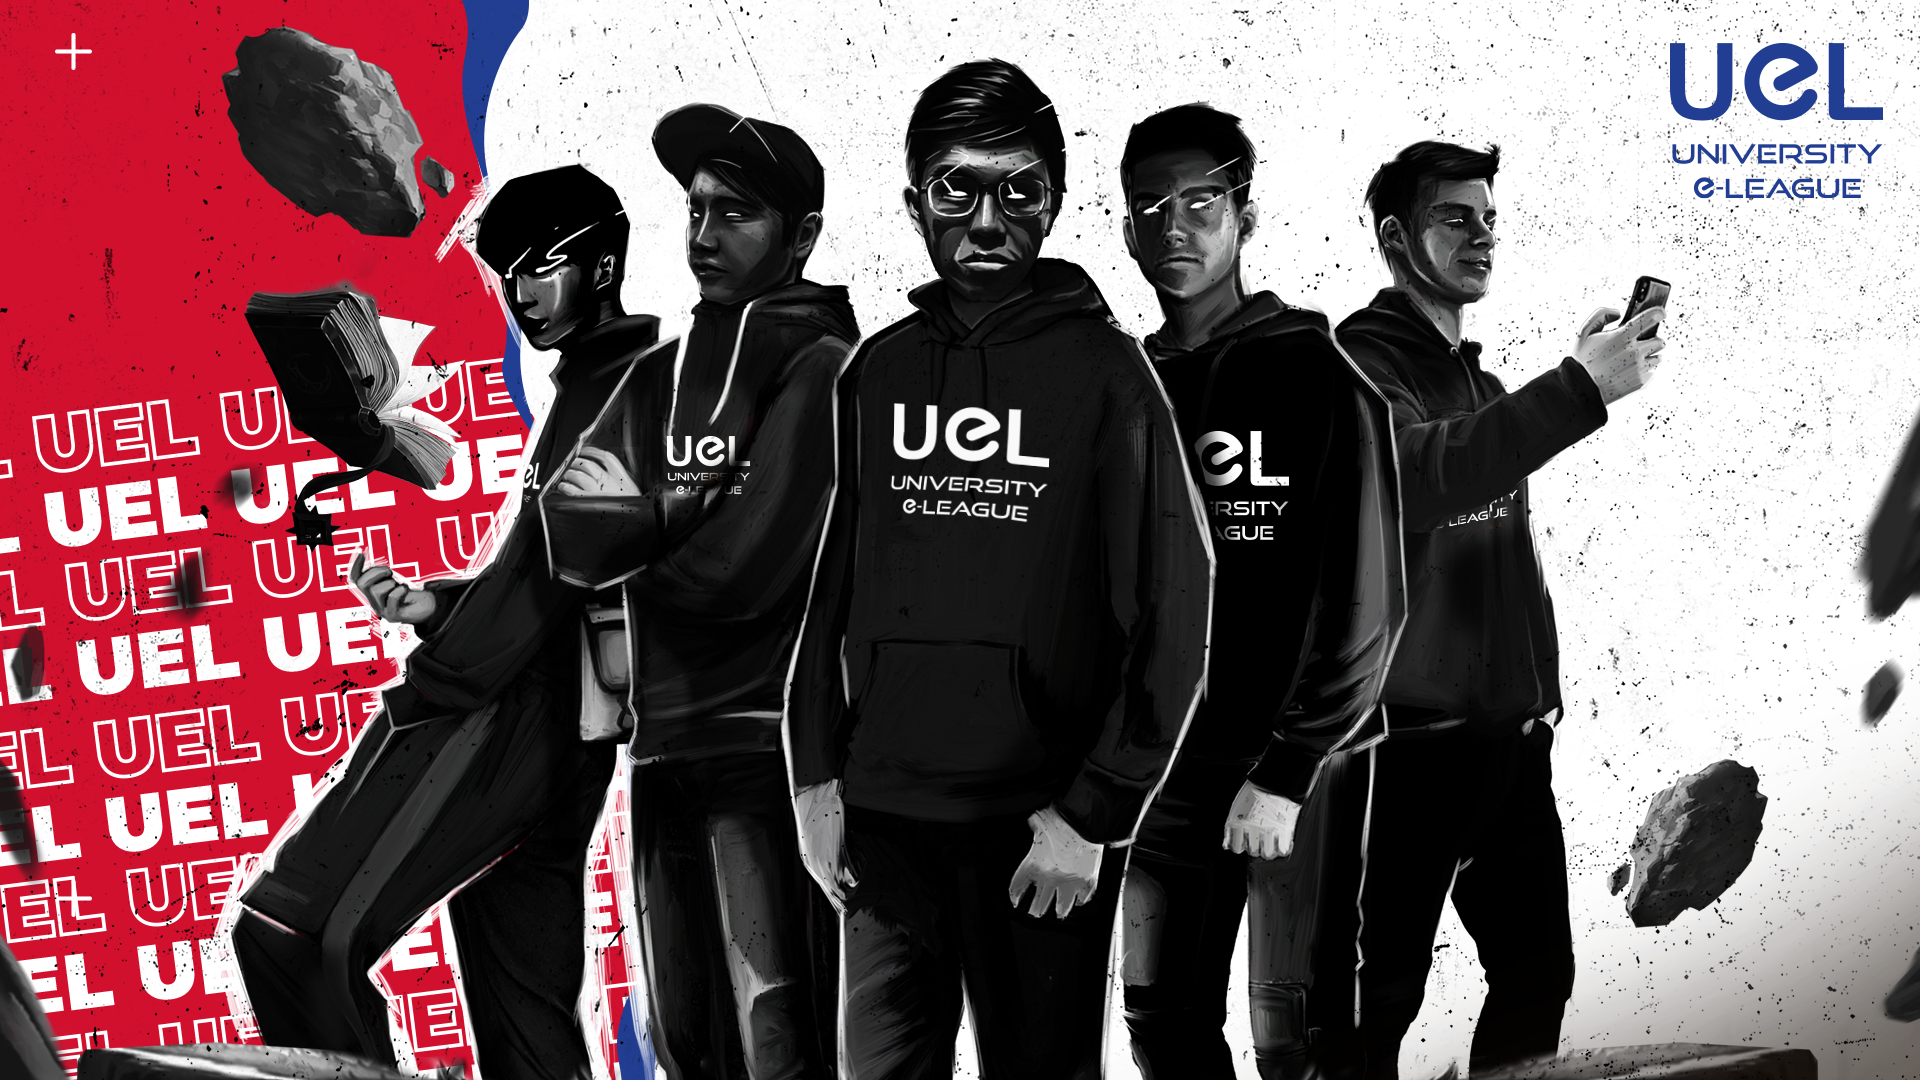 UNIVERSITY e-LEAGUE (UEL) ANNOUNCED IN MALAYSIA FOR 2021 - The Gaming Company